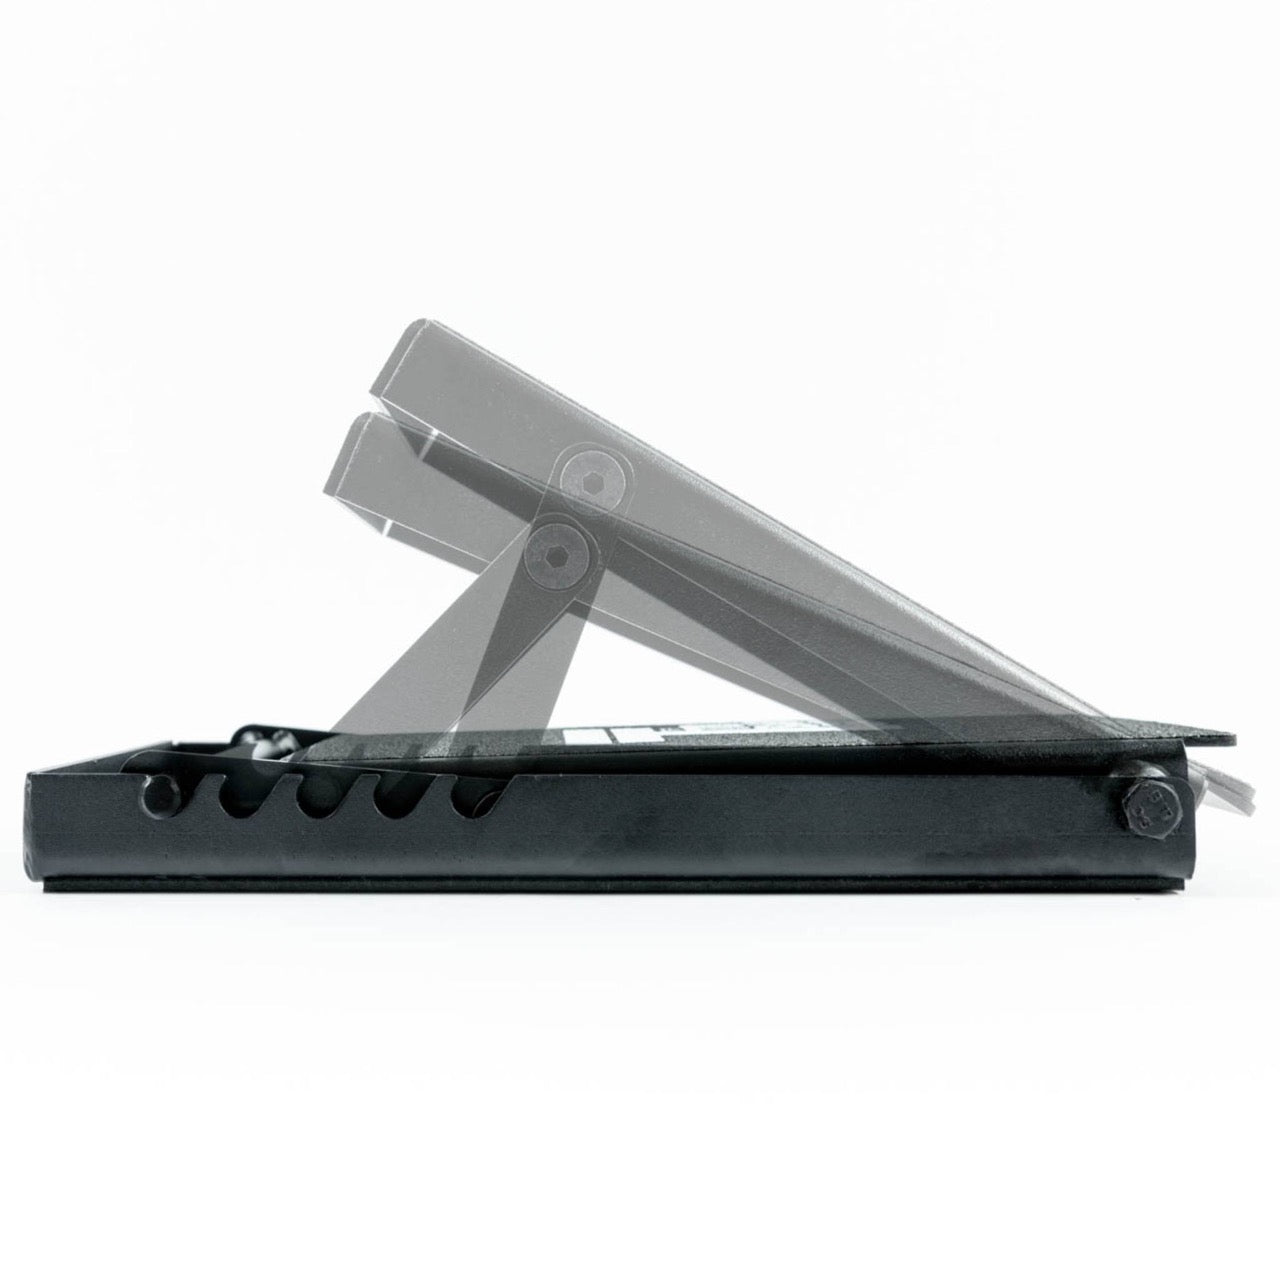 Introducing The New Slant Ramps | Top Adjustable Squat Wedges | The Tib Bar Guy